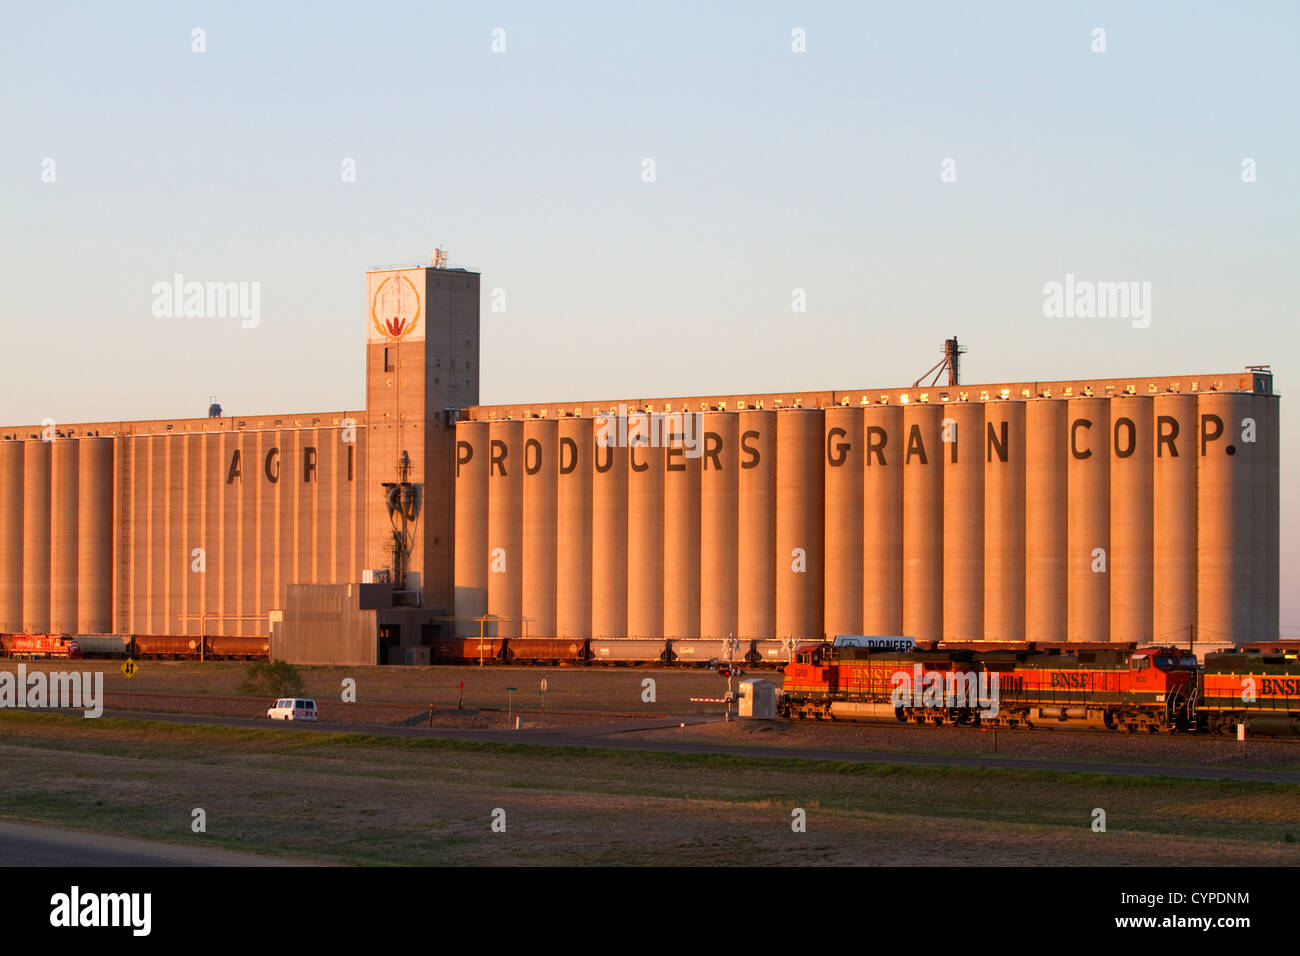 BNSF Railway train in front of the Agri Producers Grain Corp grain elevators at Plainview, Texas, USA. Stock Photo